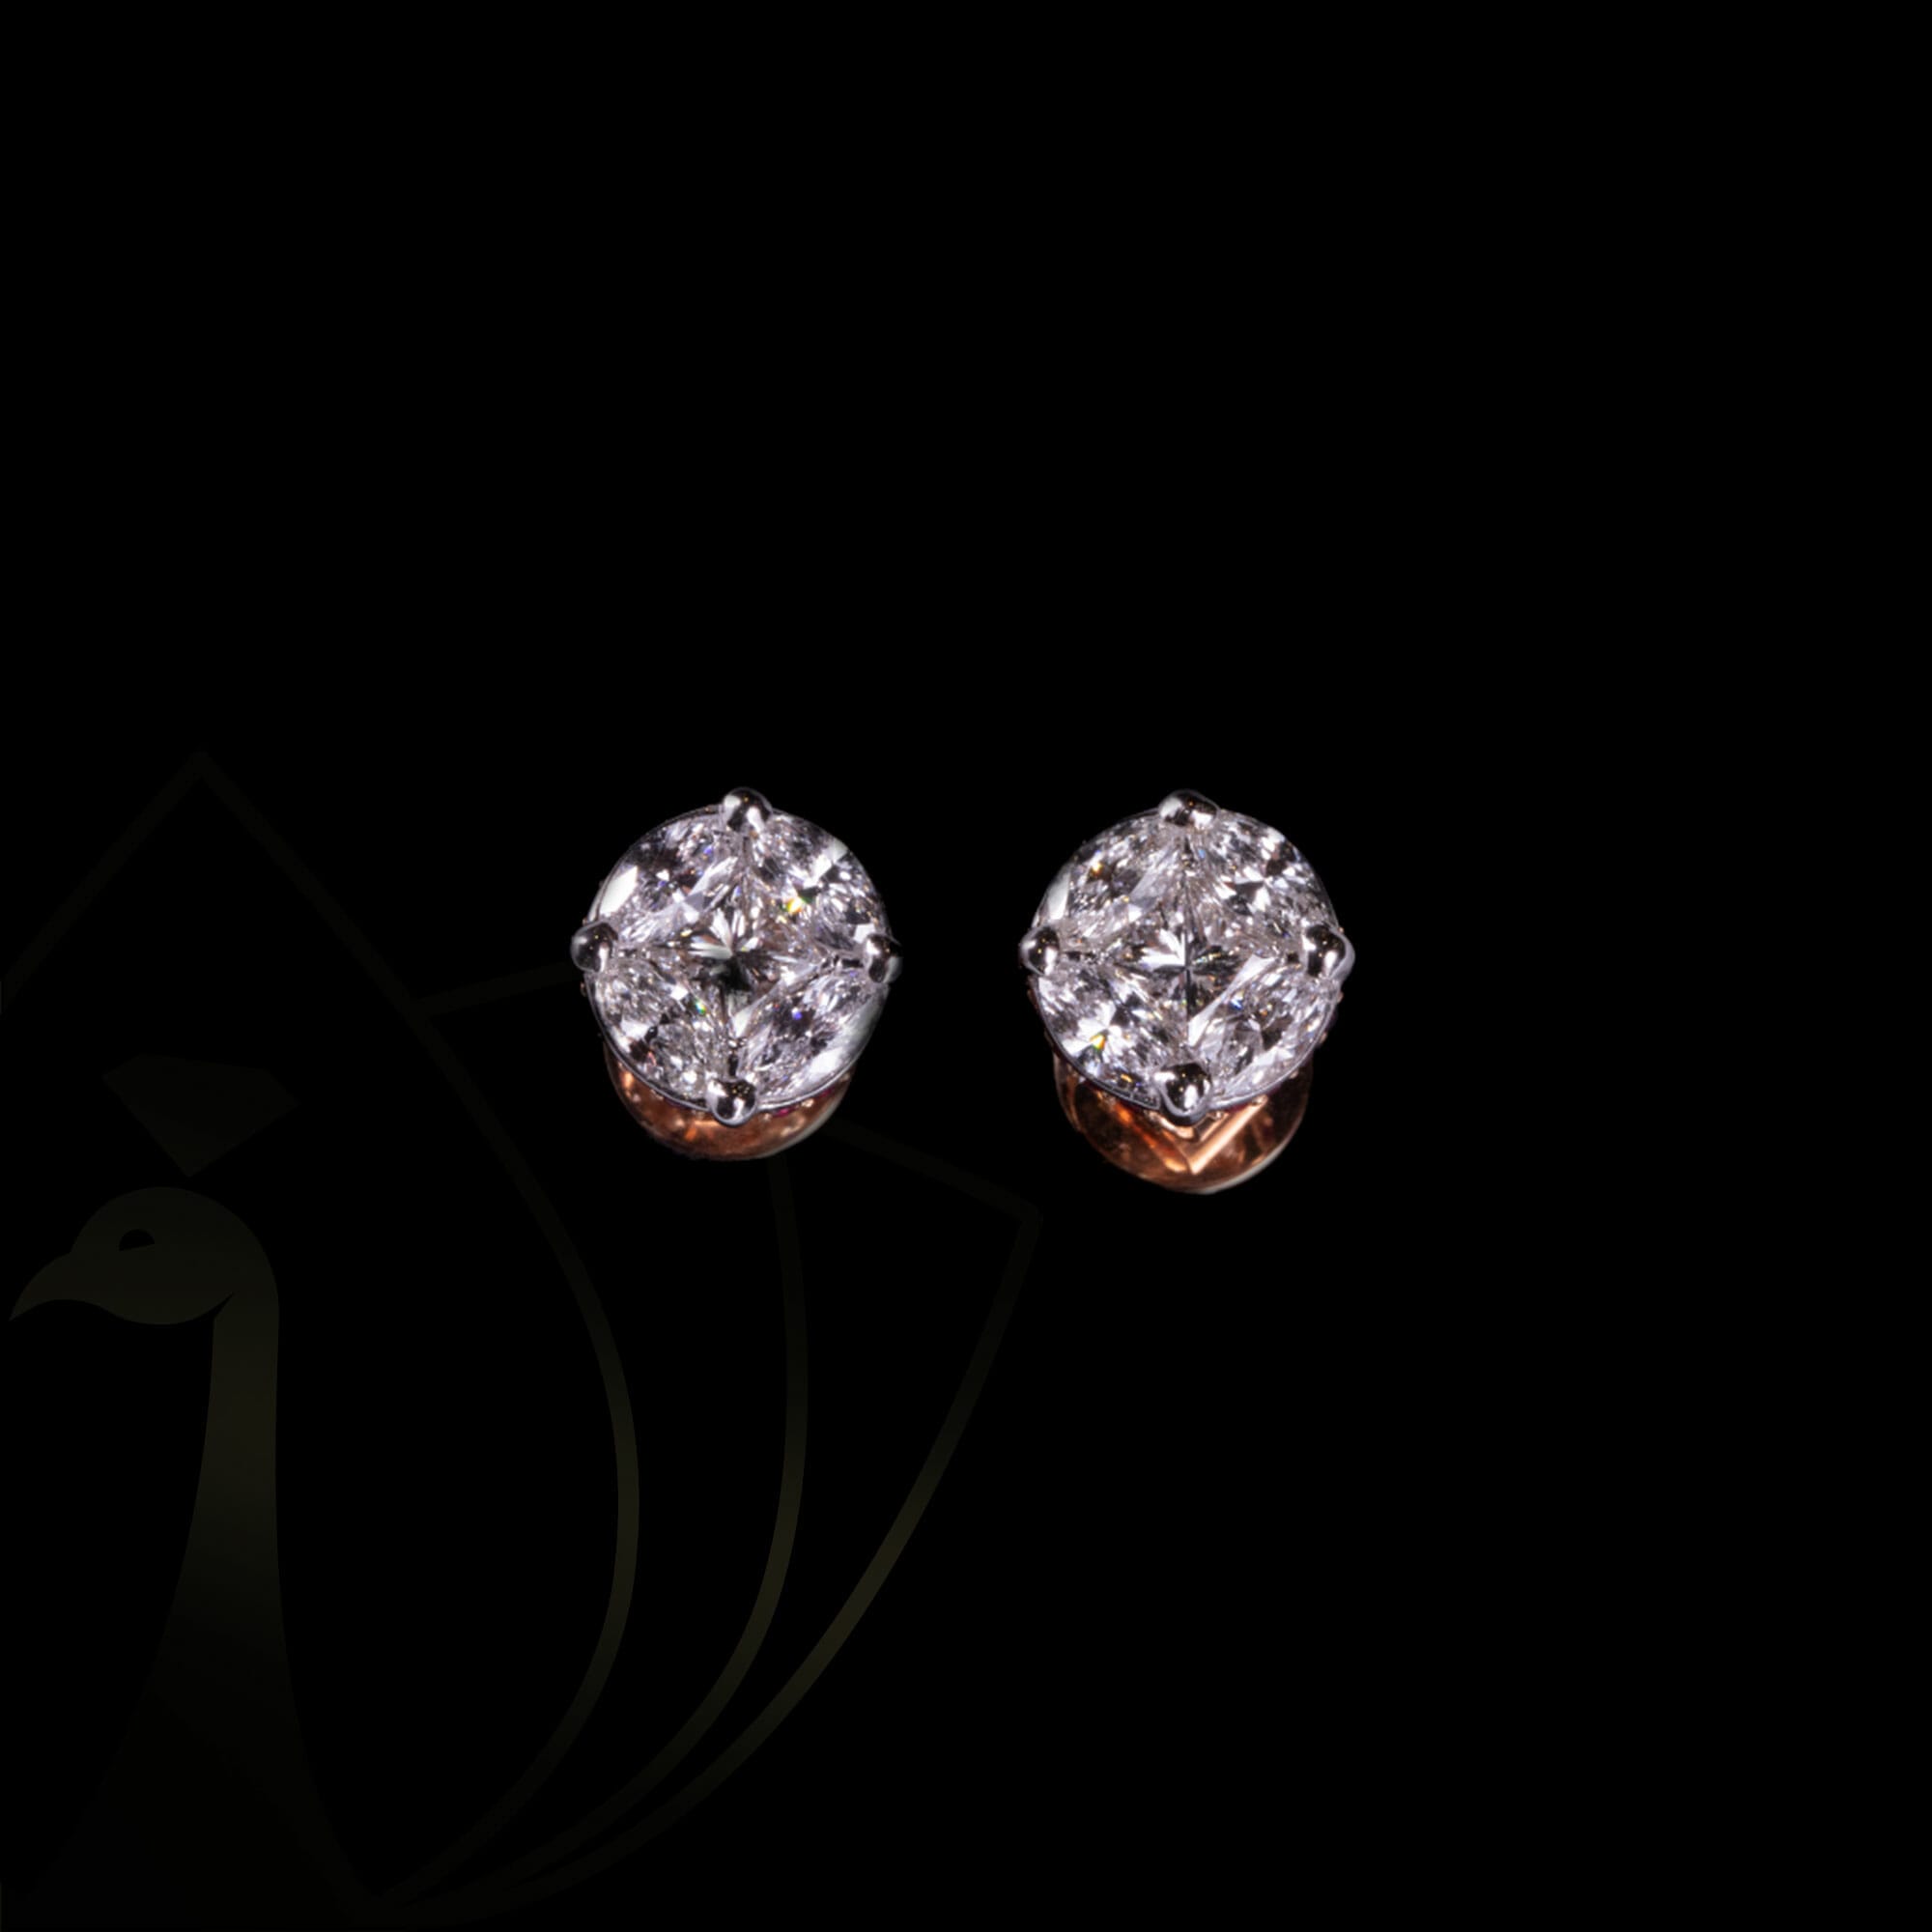 A pair of rounded radiance diamond earrings with solitaire diamonds.